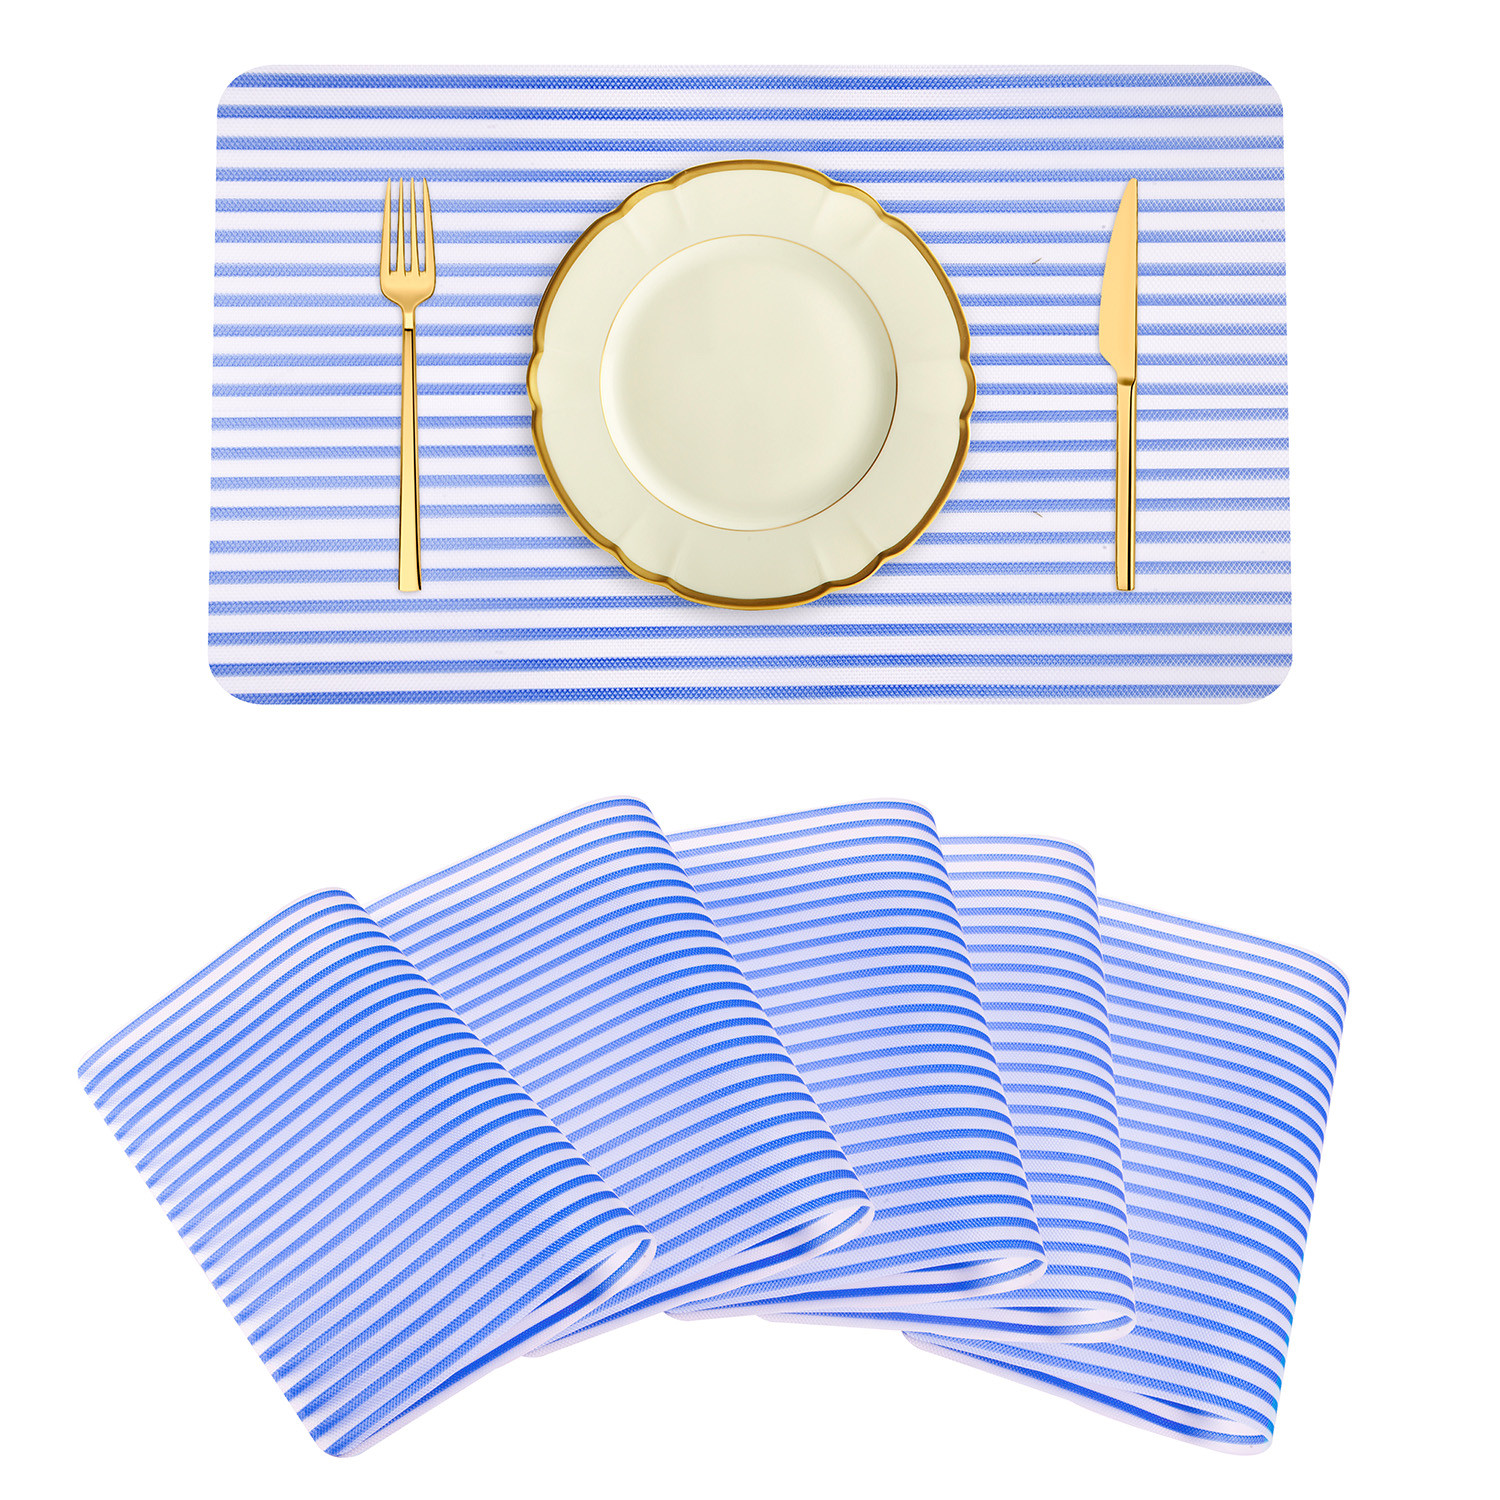 Kuber Industries Placemat | Placemats for Dining Room | Anti-Slip Table Mat Set | Placemats for Kitchen Table | Dining Table Placemats | Lining-Design Placemat | 6 Piece Set | Blue